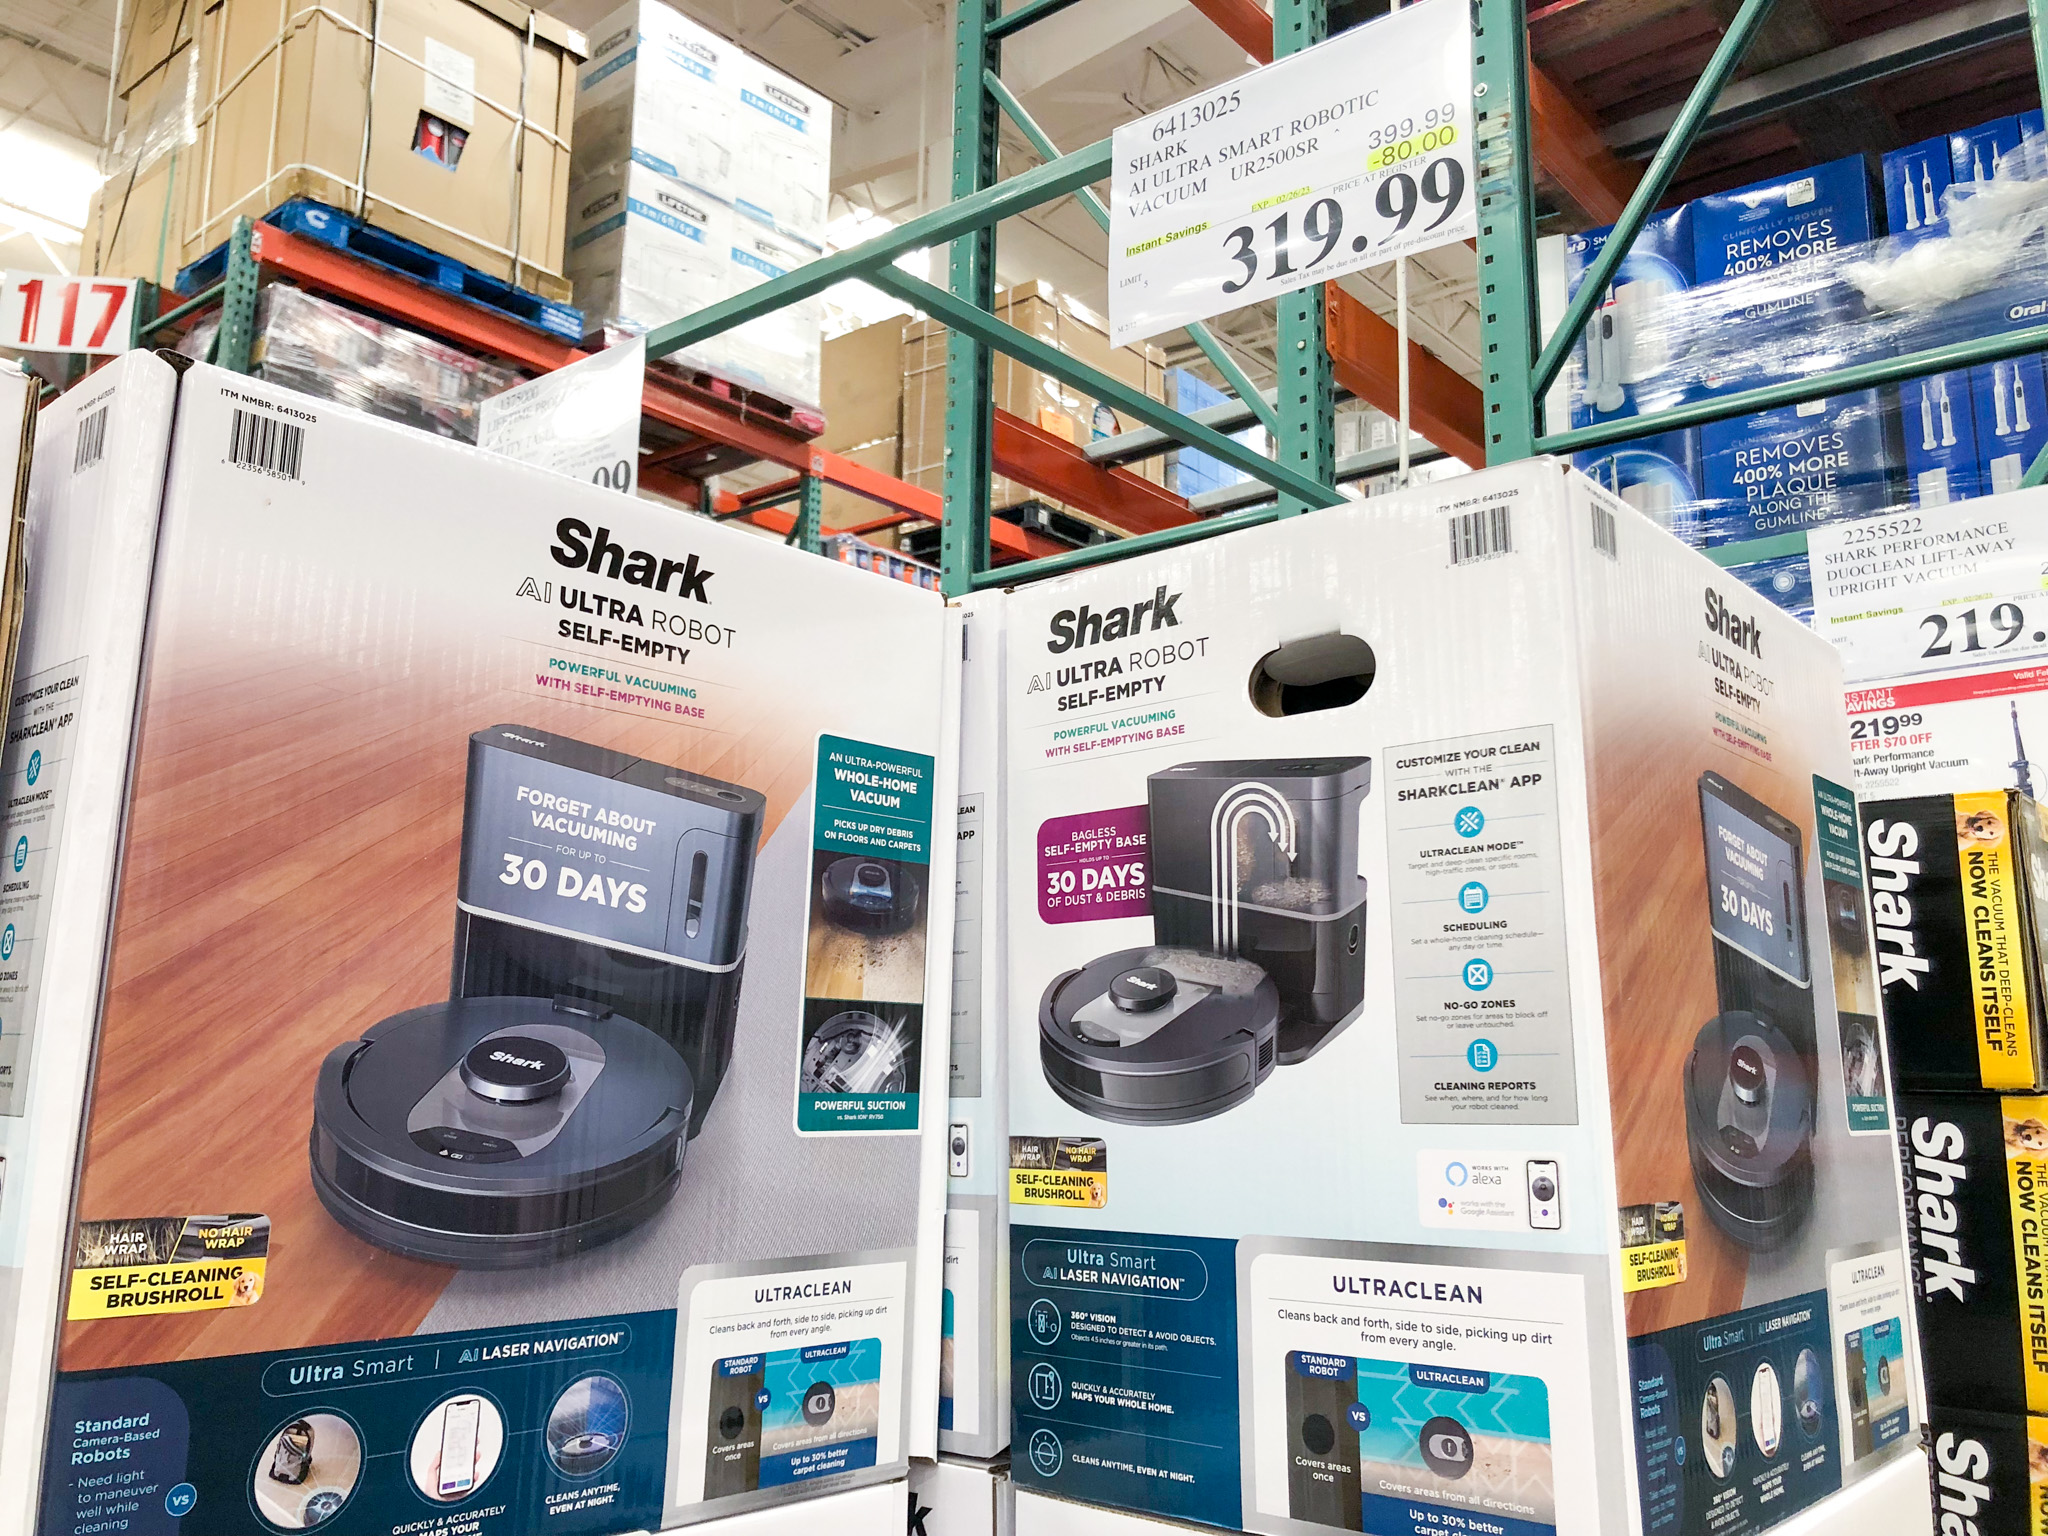 Get Shark AI Ultra Robot Vacuum Costco and Save - The Krazy Coupon Lady